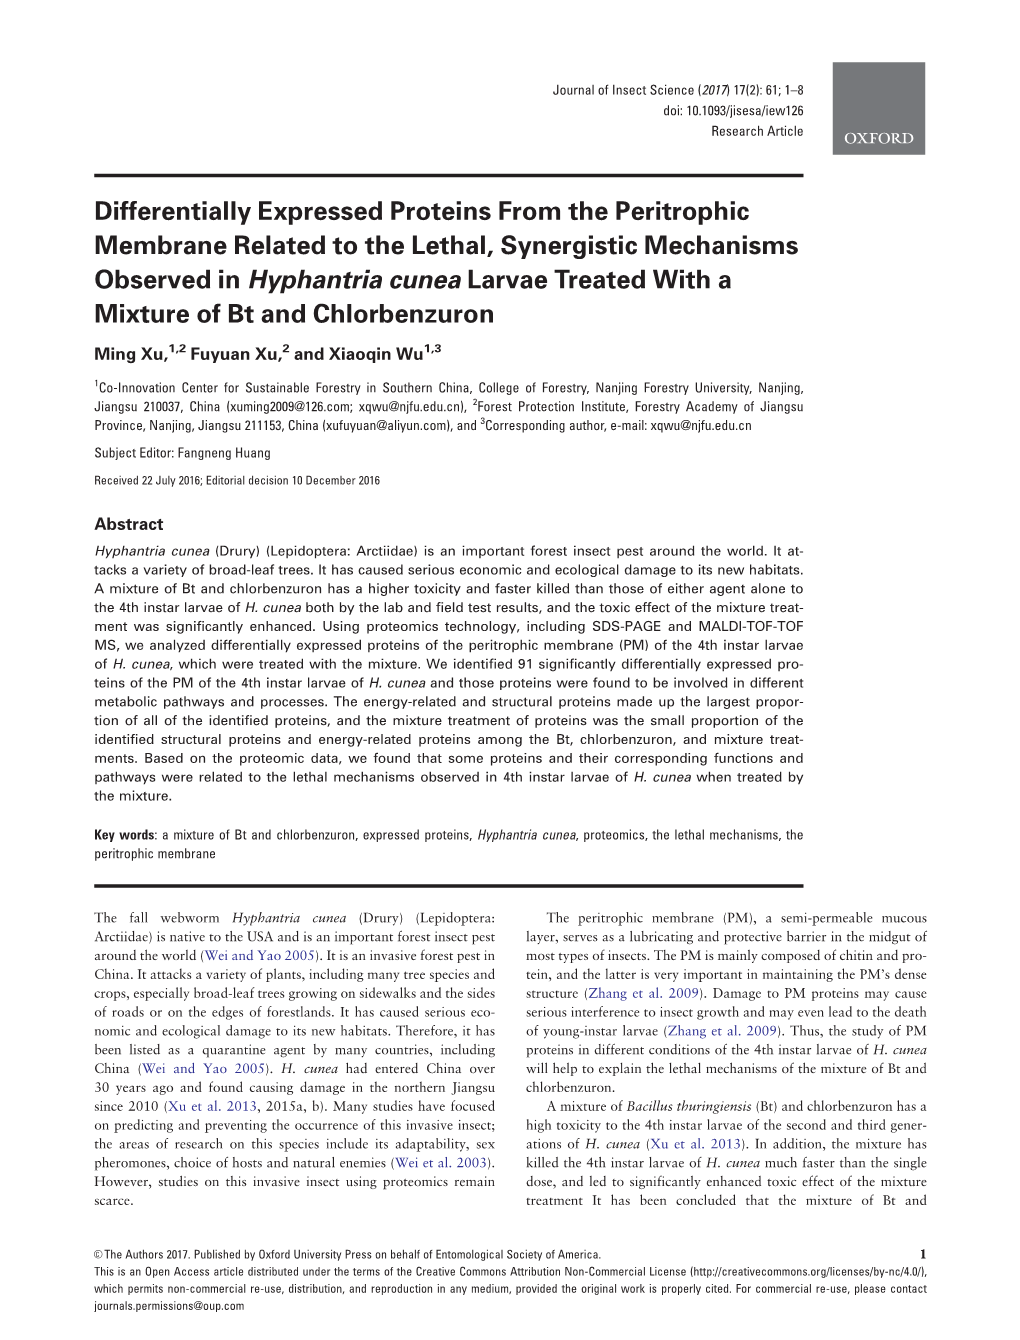 Differentially Expressed Proteins from the Peritrophic Membrane Related